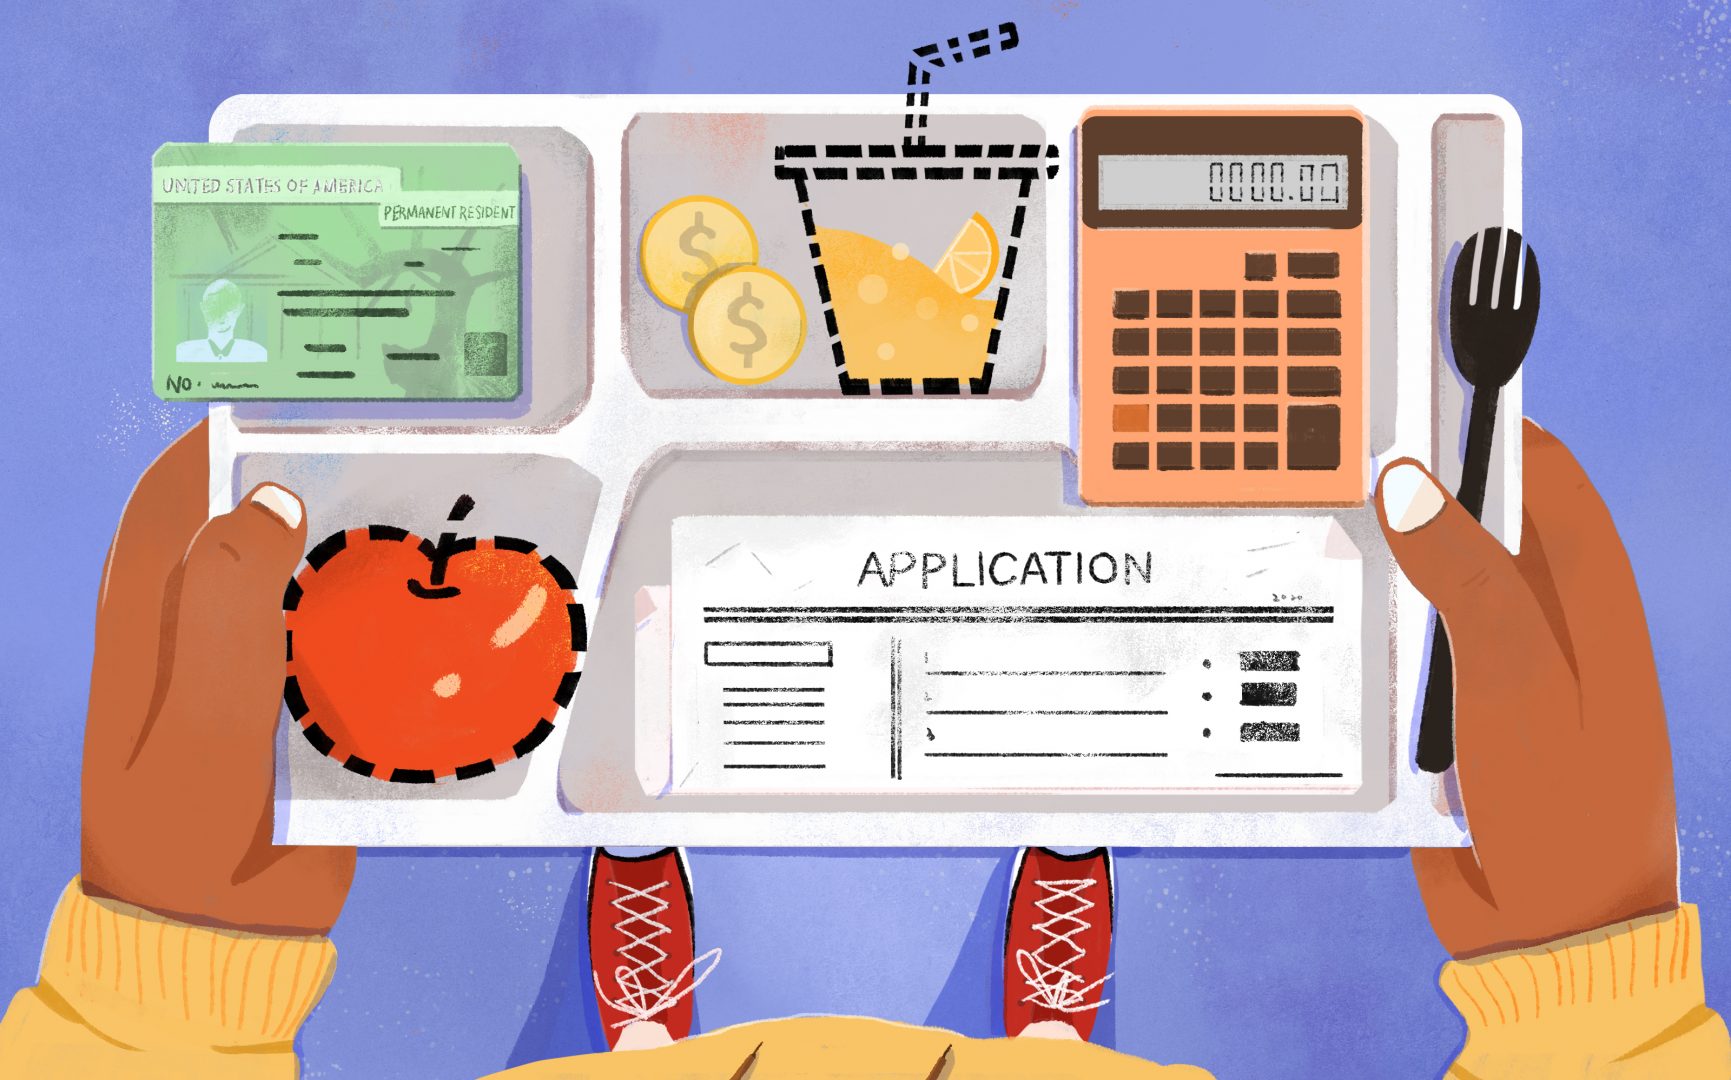 This illustration shows an application for school lunch